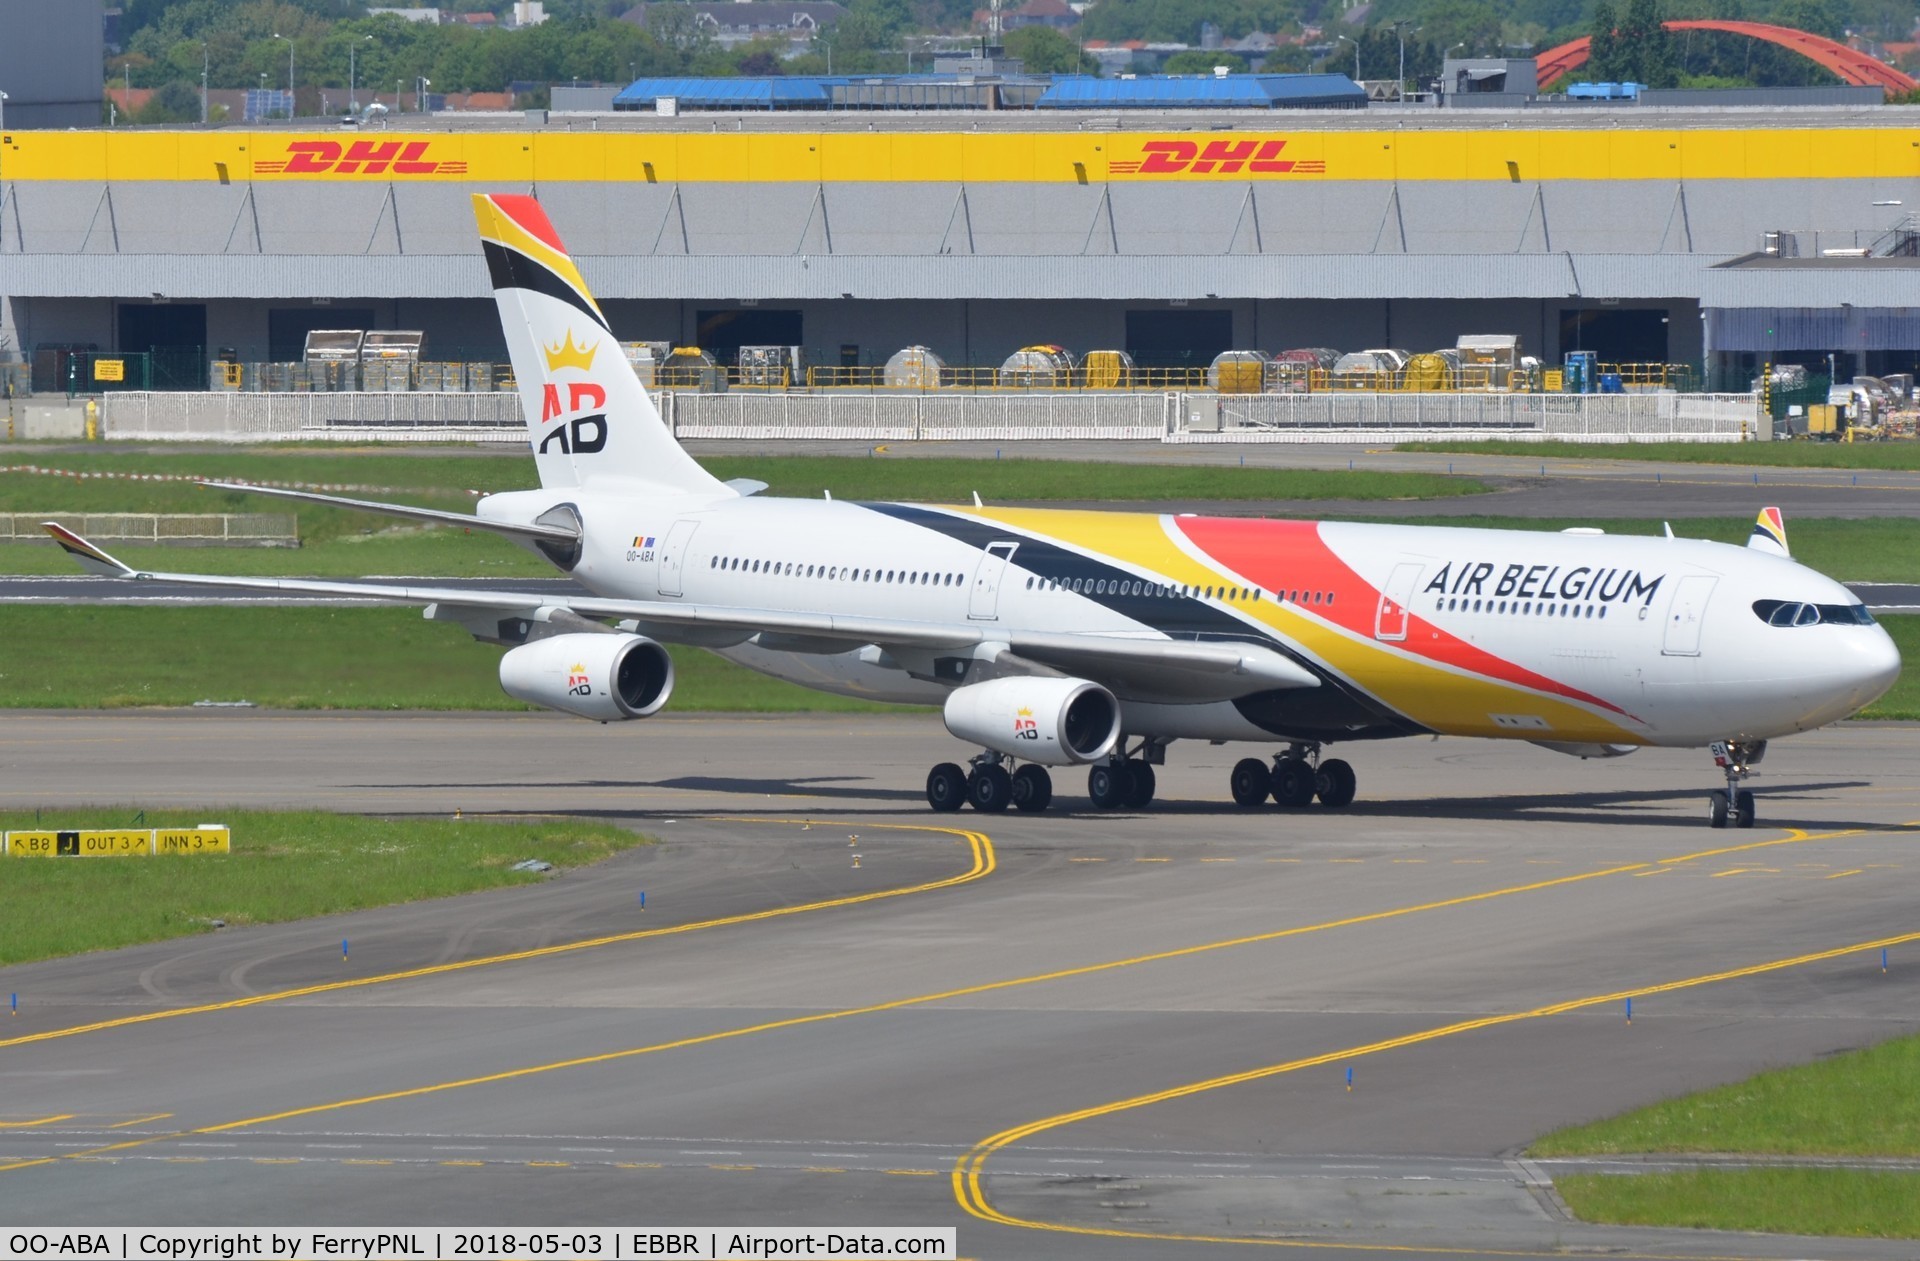 OO-ABA, 2007 Airbus A340-313 C/N 835, Air Belgium A343 rolling to its stand.